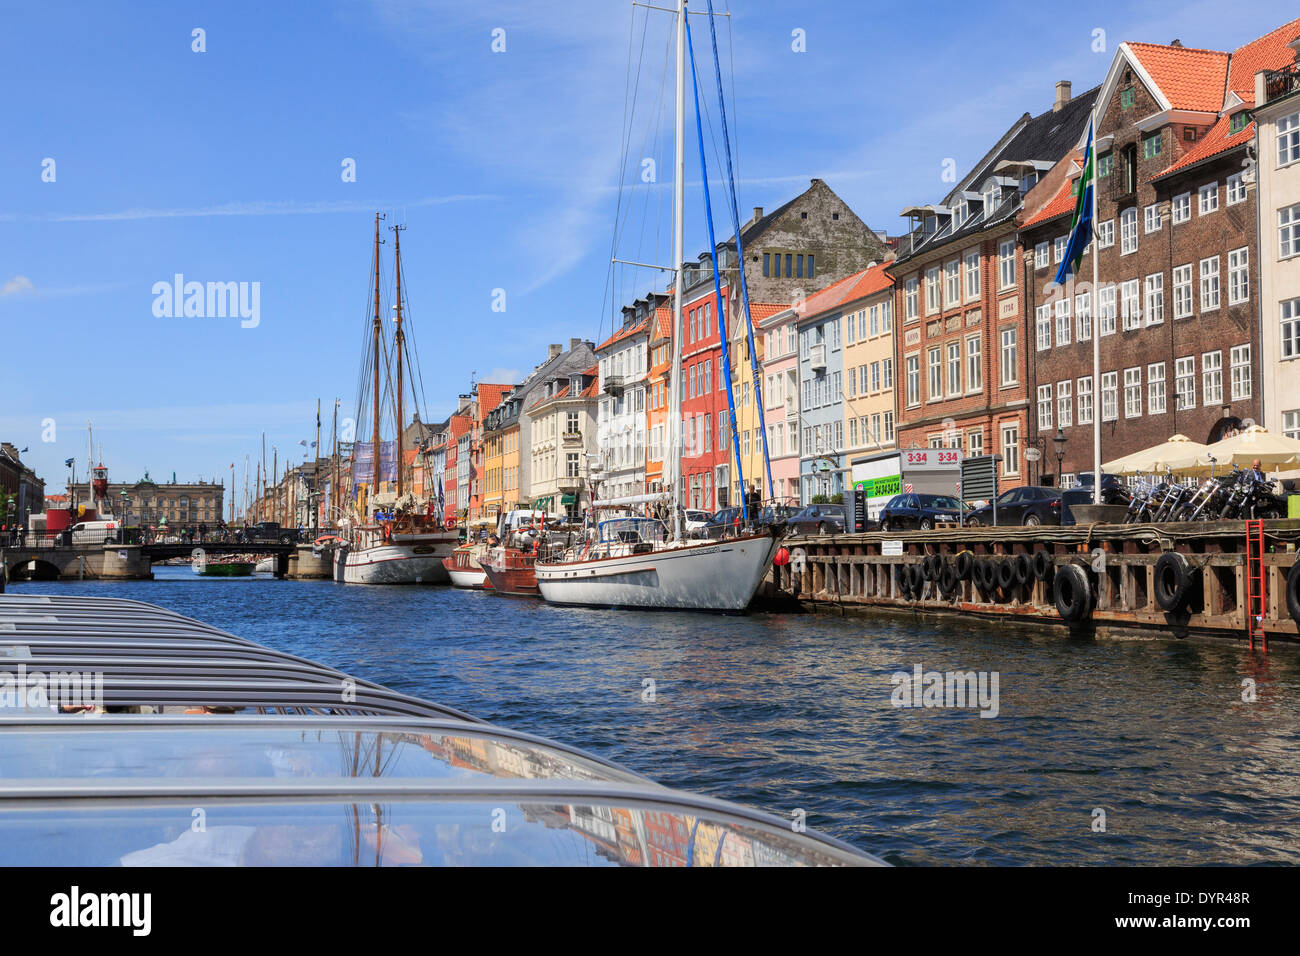 Tourists canal sightseeing tour boat passing old buildings on quay at Nyhavn, Copenhagen, Zealand, Denmark, Europe Stock Photo